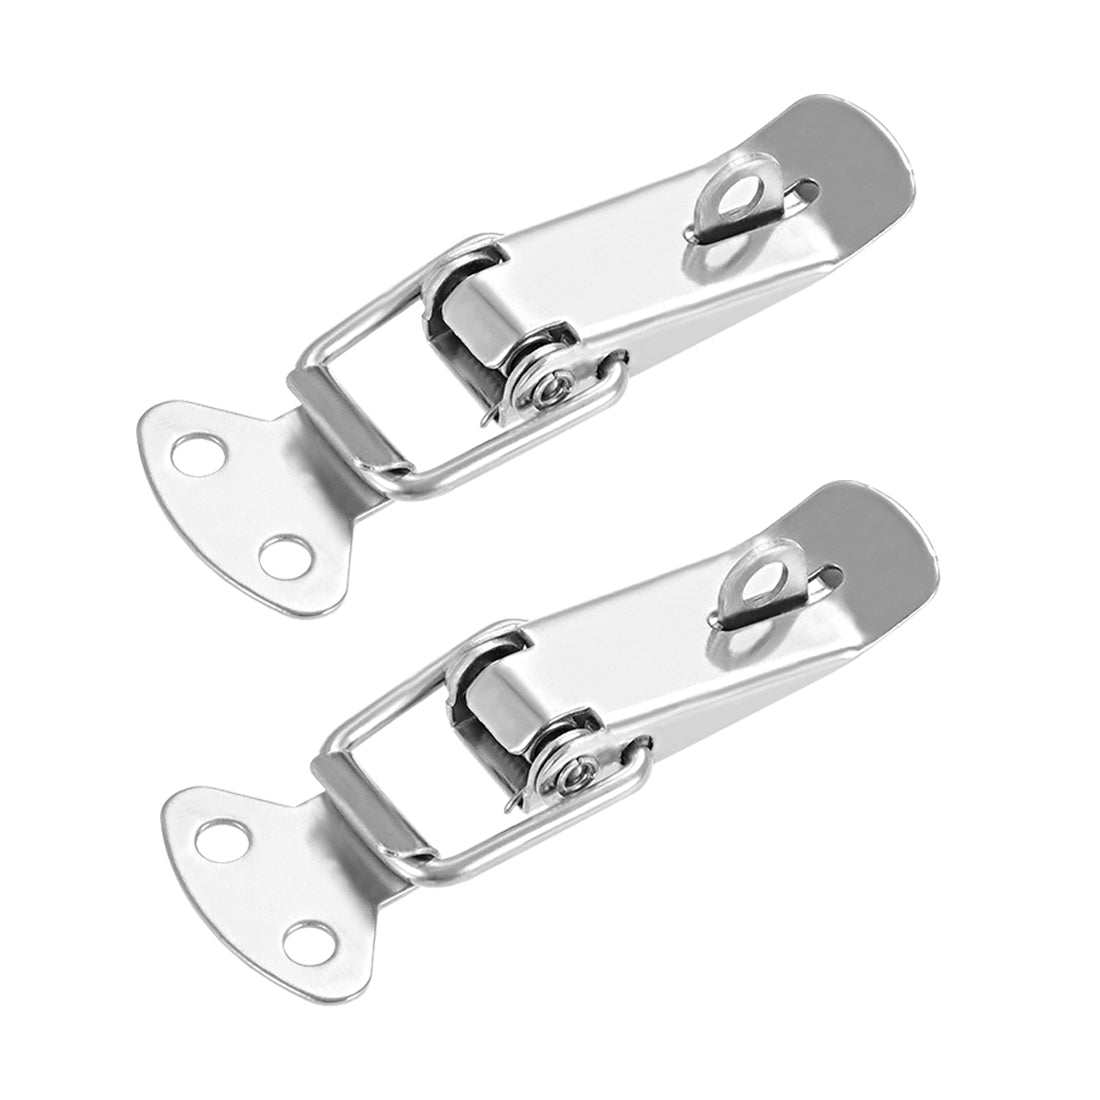 uxcell Uxcell 304 Stainless Steel Spring Loaded Toggle Case Box Chest Trunk Latch Catches Hasps Clamp 2 pcs, 72mm Overall Length